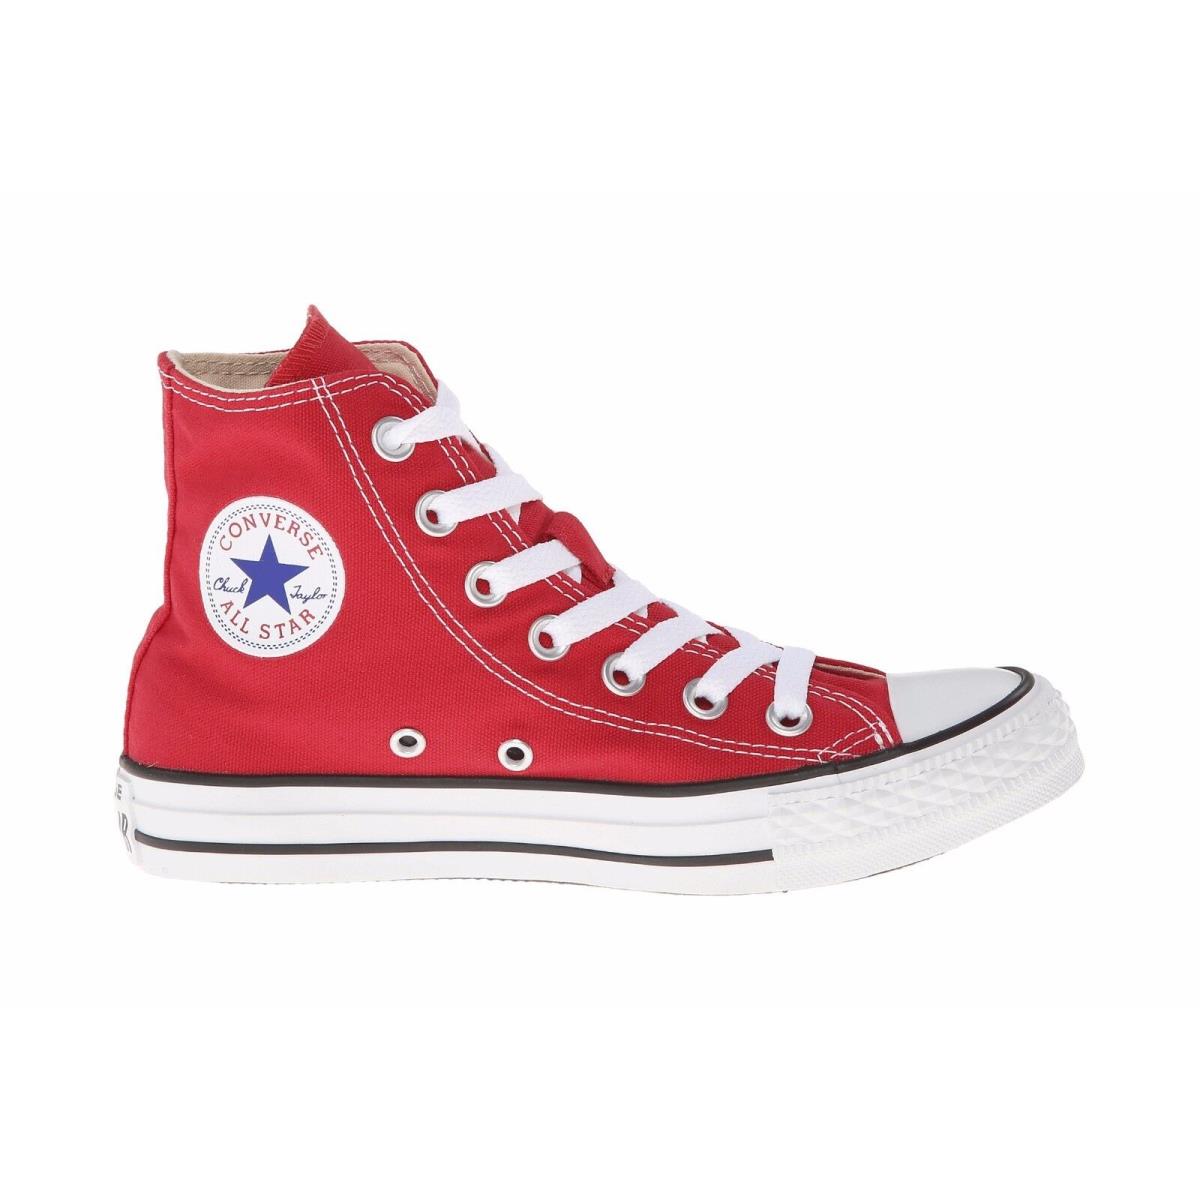 Converse Sneakers All Star Chuck Taylor Men Size Red Hi Top Canvas Shoes M9621